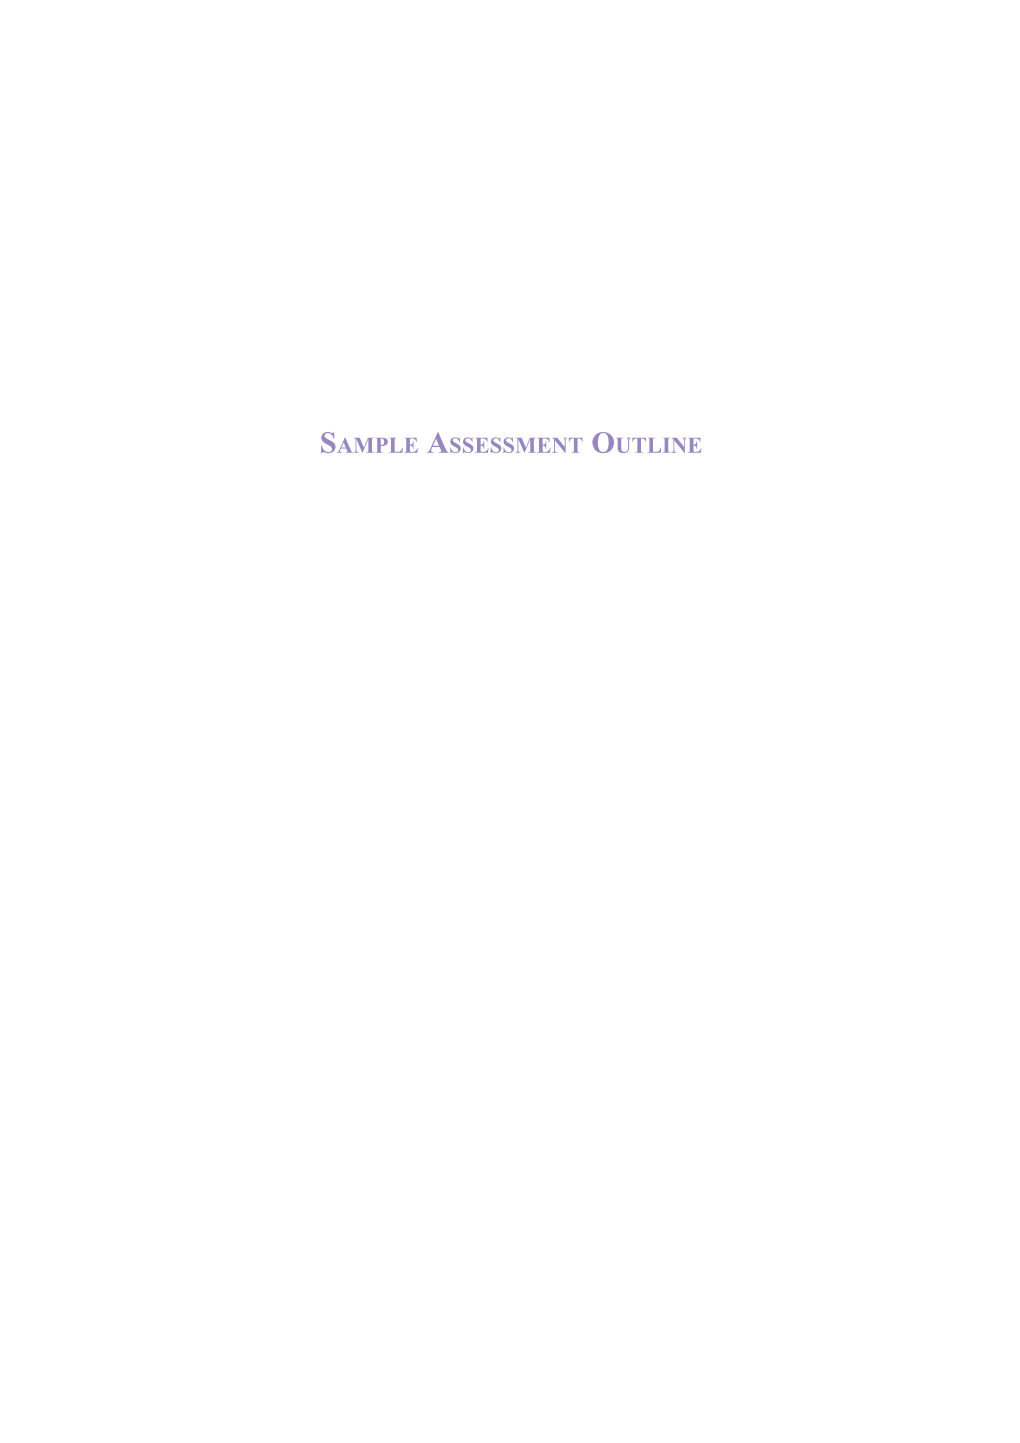 School Curriculum and Standards Authority, 2015 s19